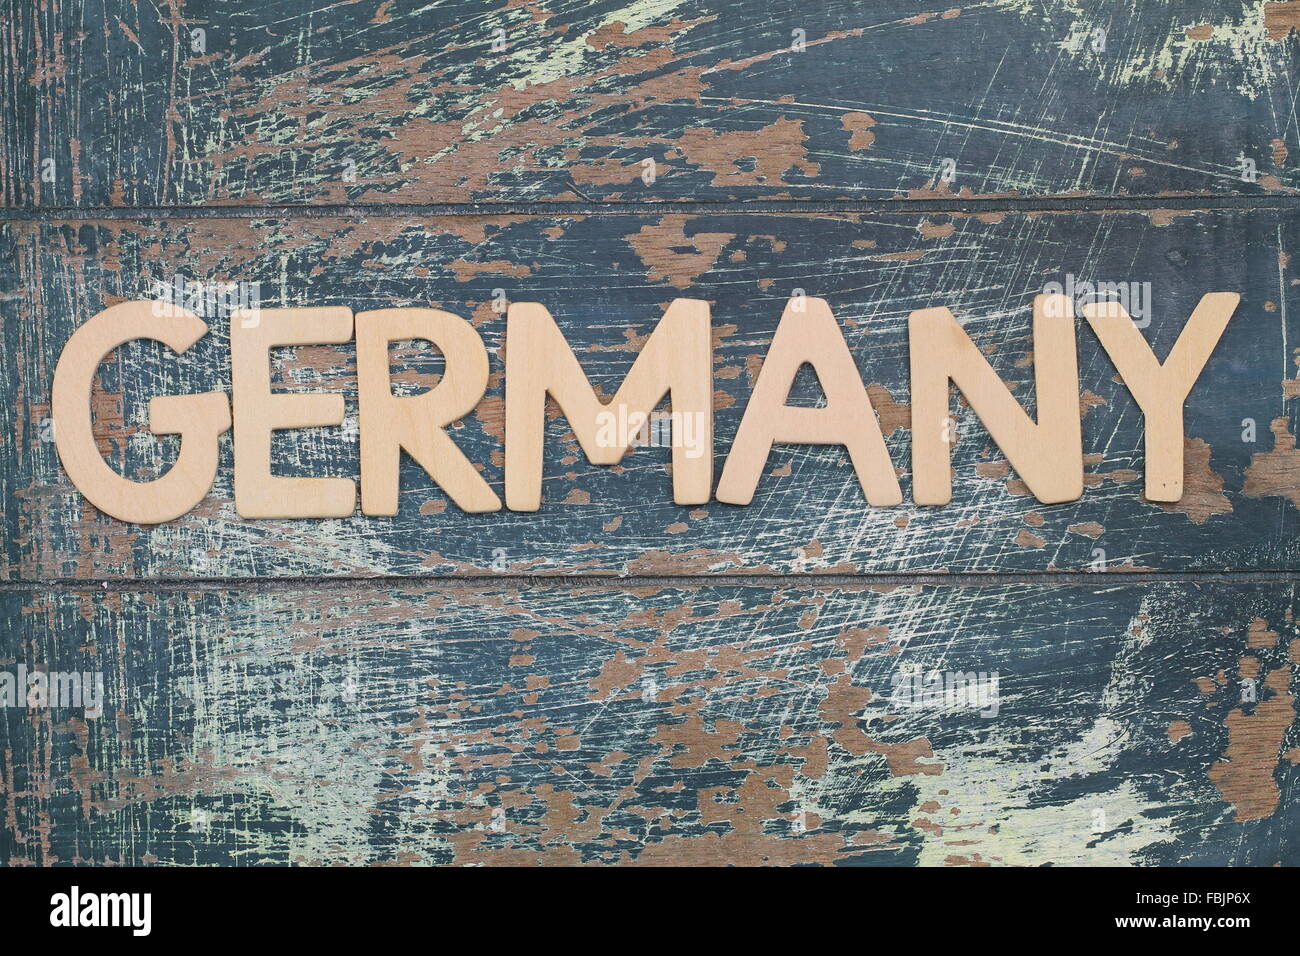 Germany written with wooden letters on rustic surface Stock Photo